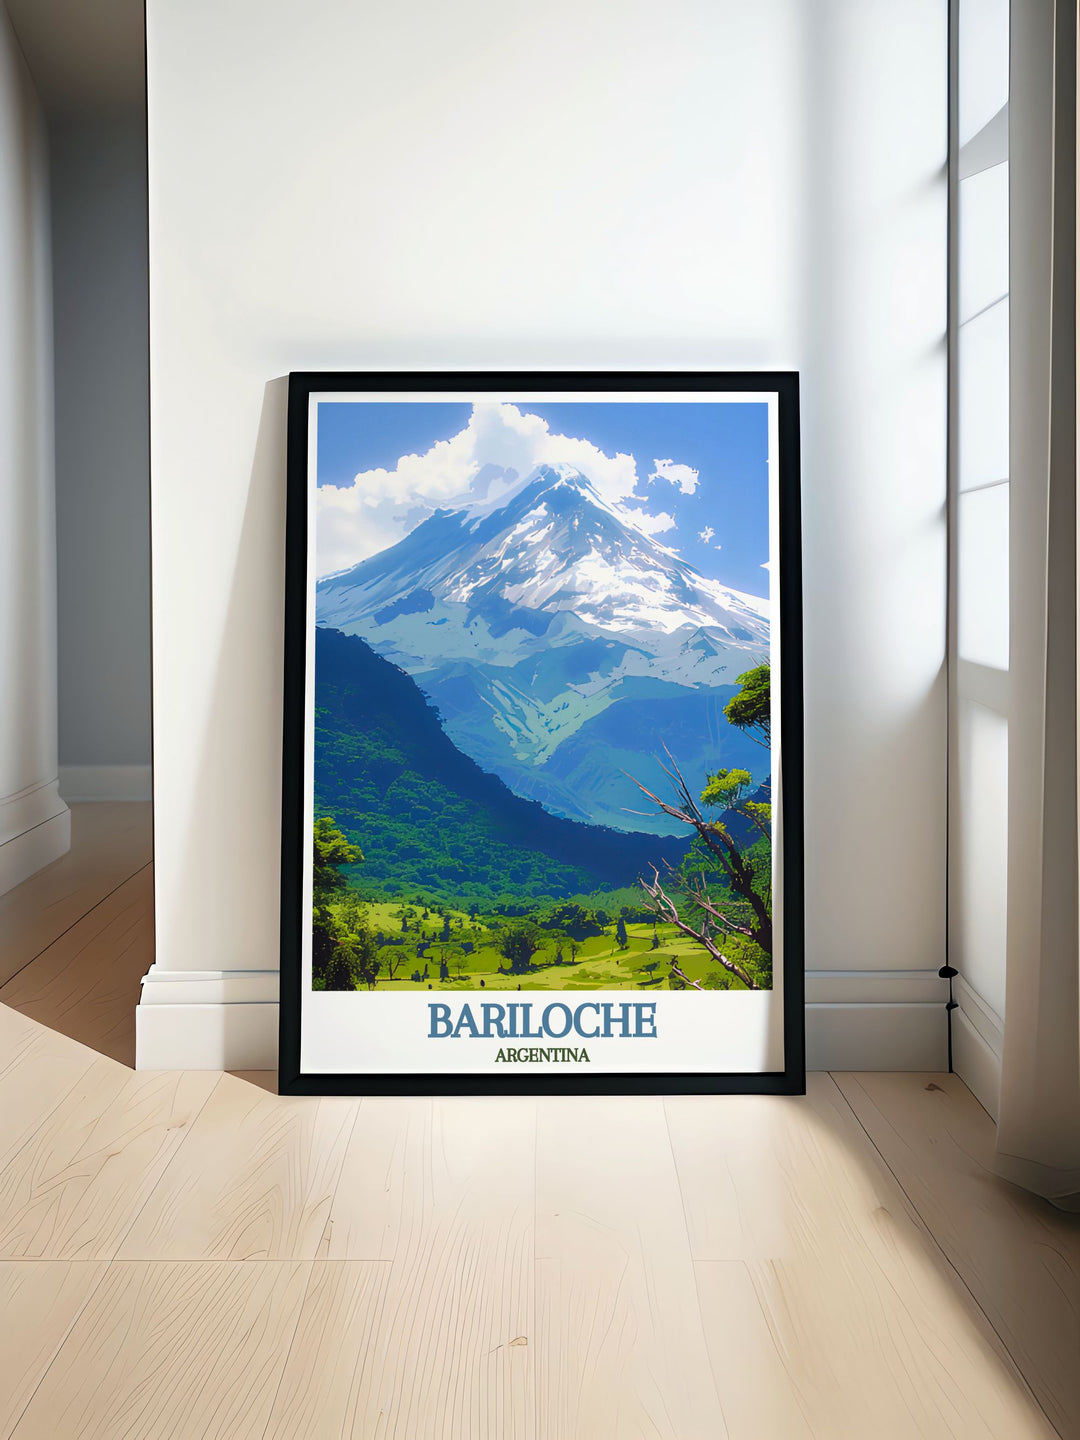 Stylish map of San Carlos de Bariloche, featuring key landmarks such as Tronador Volcano and the Andes. Perfect for gifts or home decor, this print offers a unique representation of one of Argentinas most scenic regions.